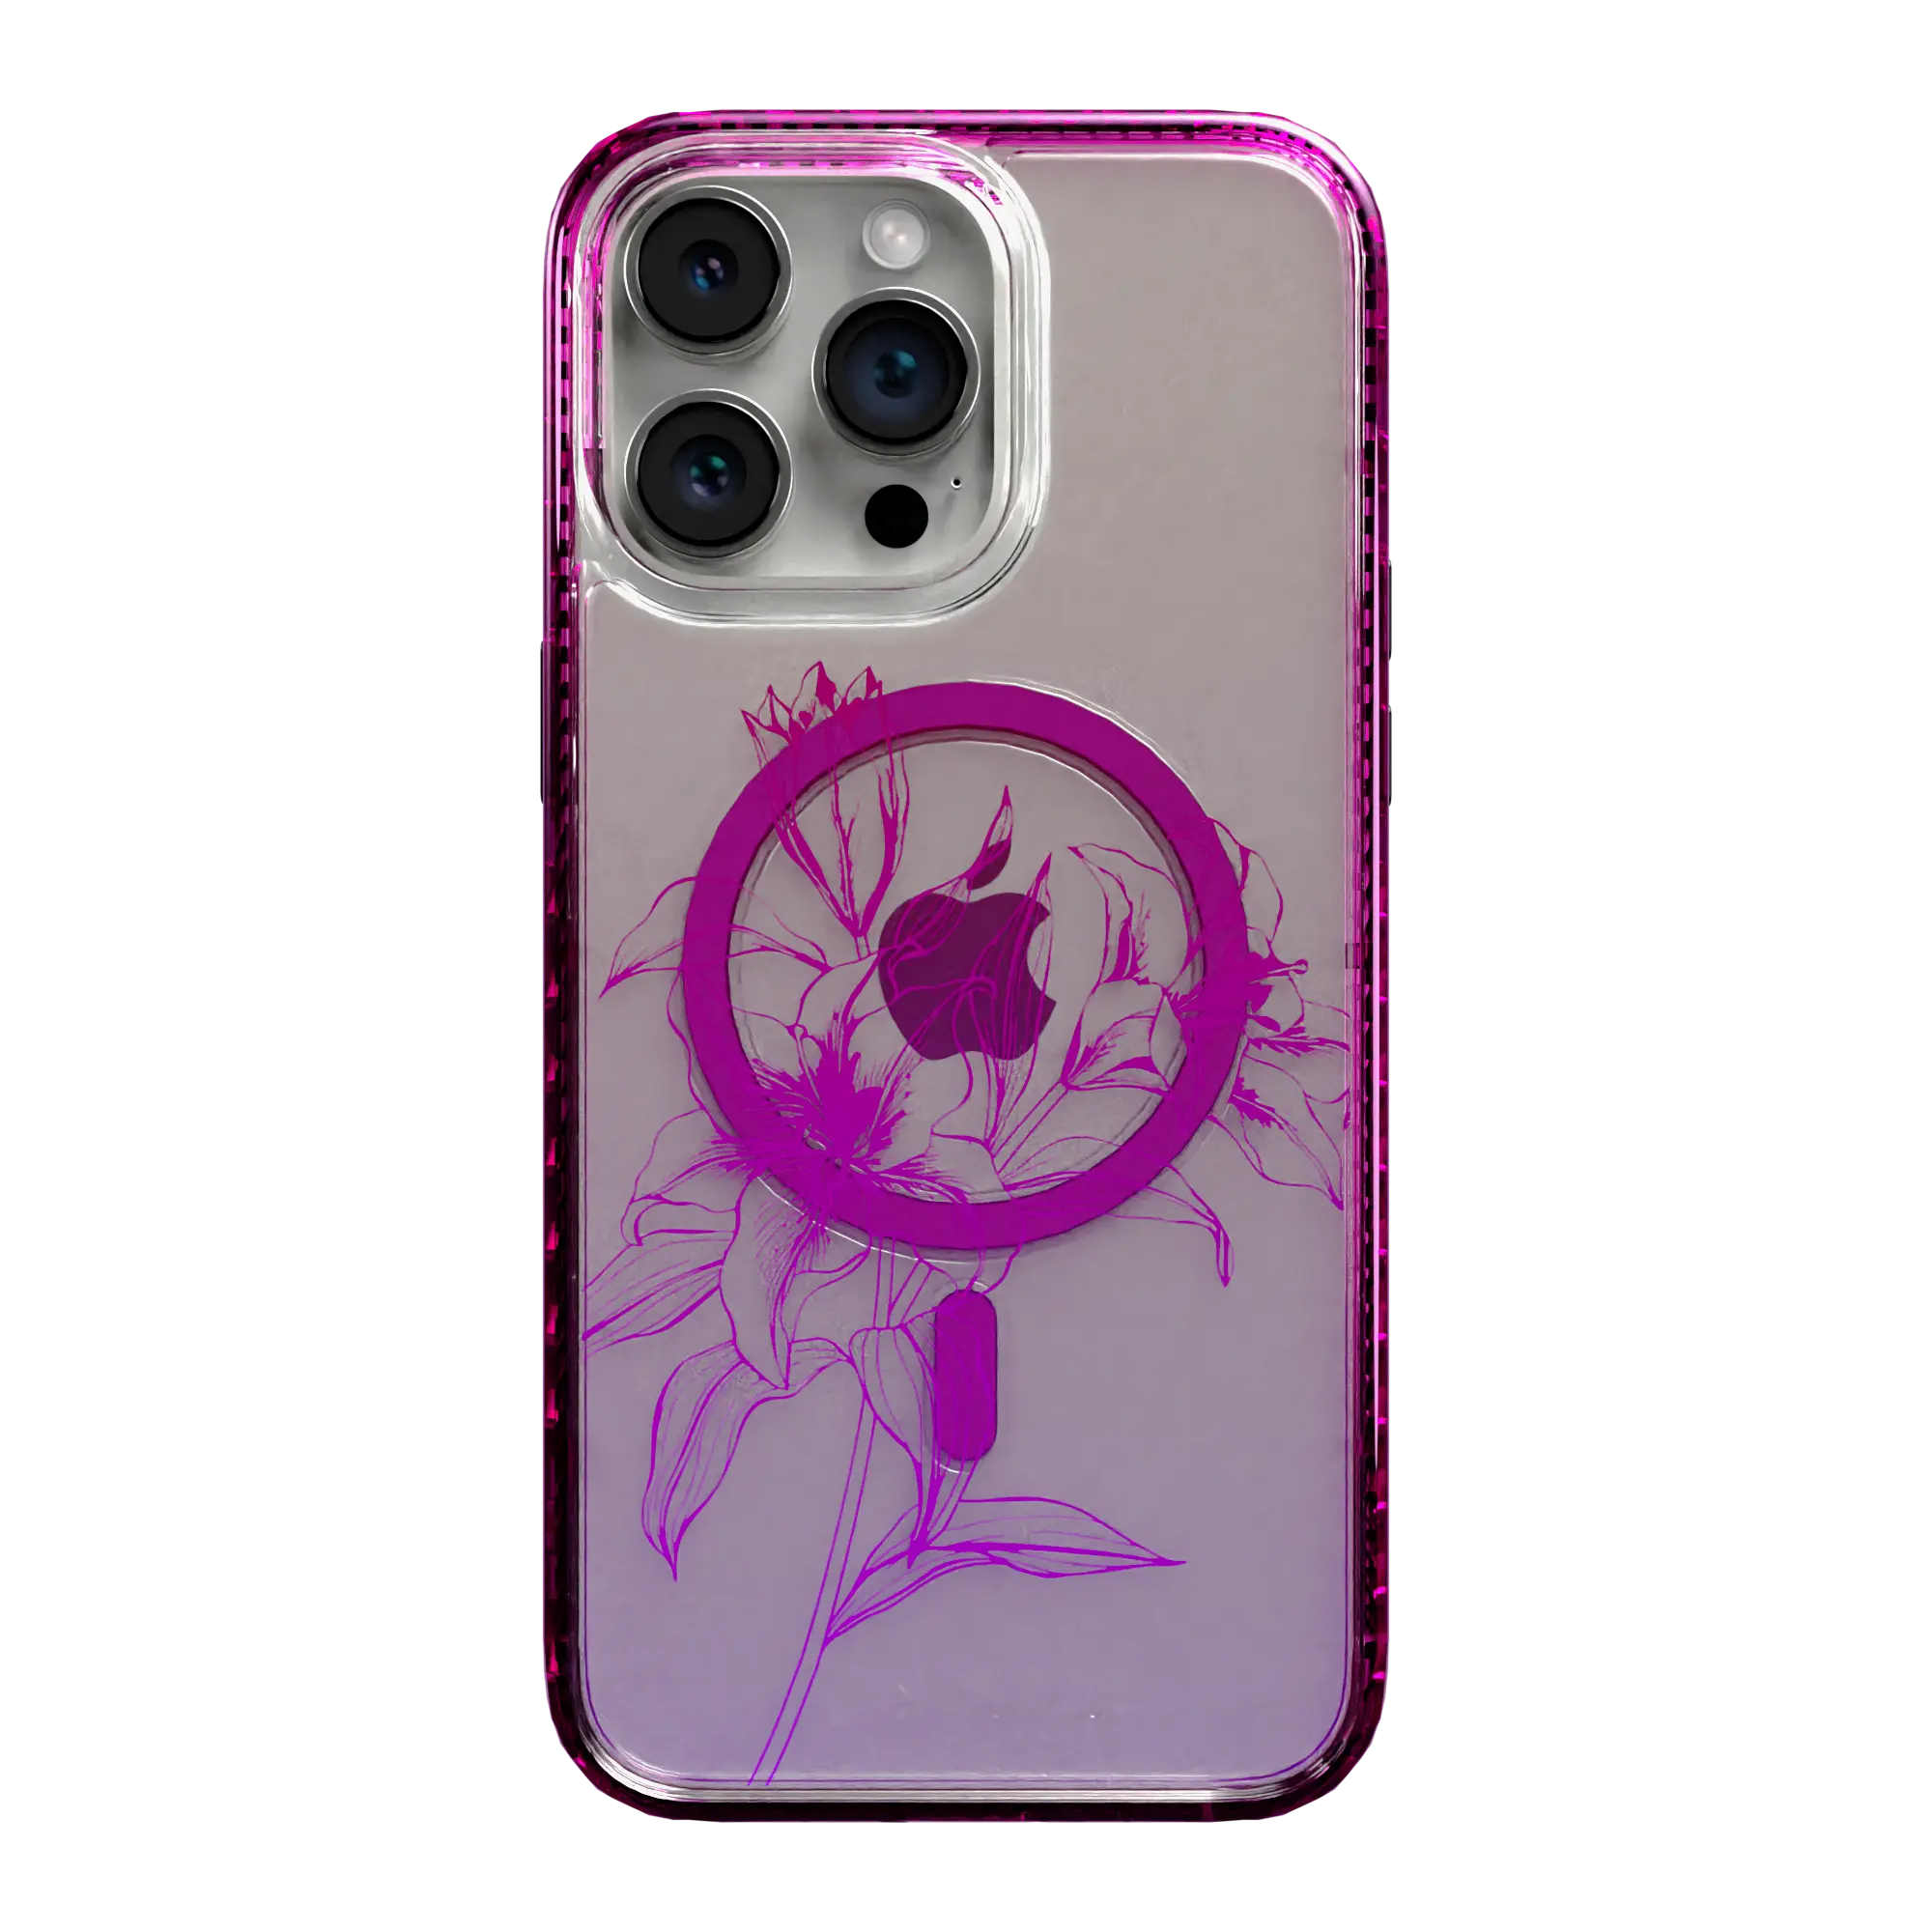 Apple-iPhone-15-Pro-Max-Vivid-Magenta Pink Prism | Protective MagSafe Case | Ombre Bouquet Collection for Apple iPhone 15 Series cellhelmet cellhelmet